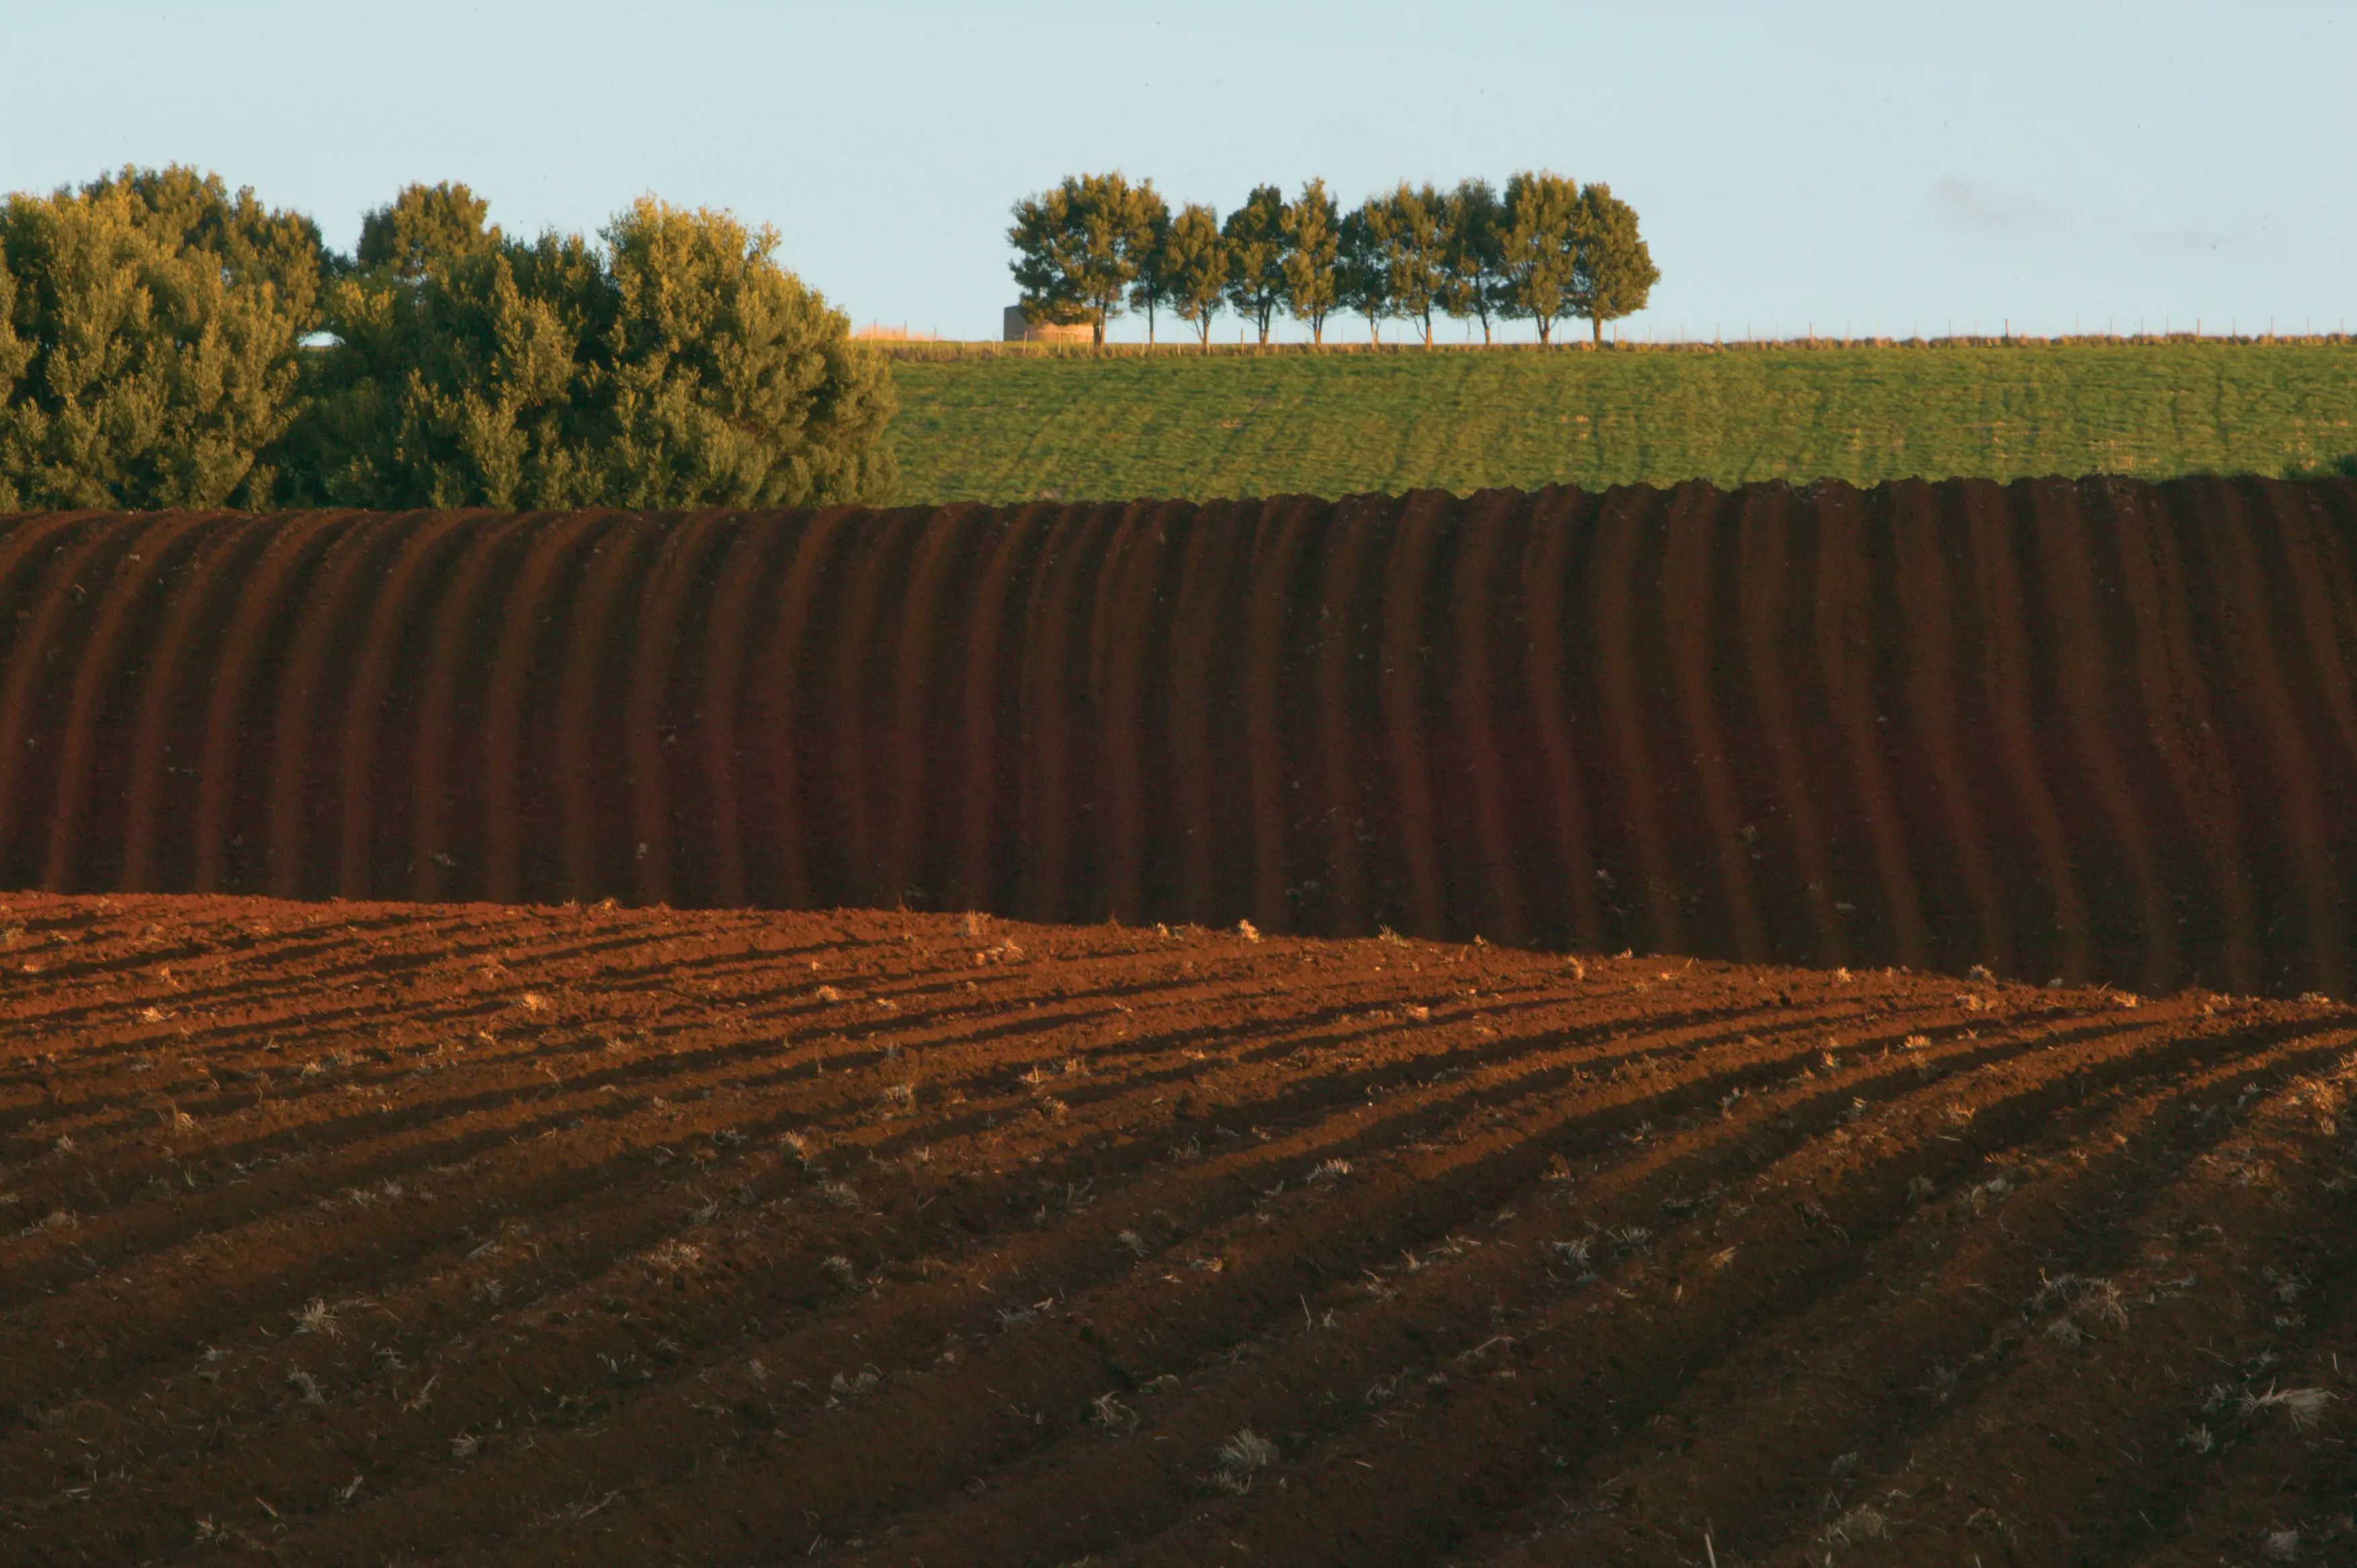 Red, furrowed soil in a large field reaching out into the distance.